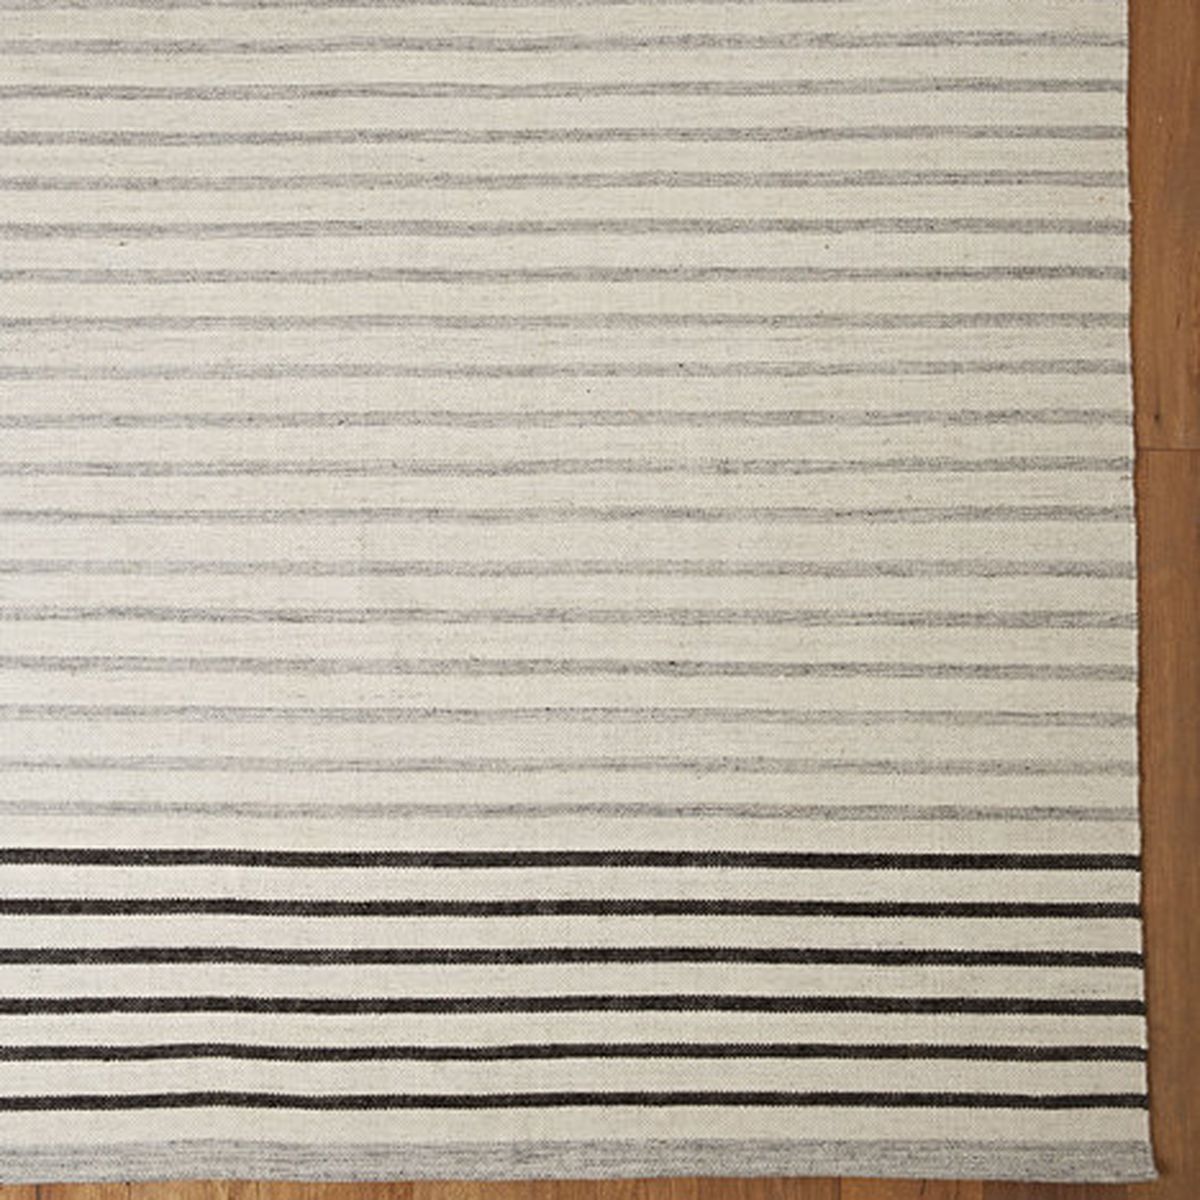 Rectangular rug with mostly gray stripes and a few black stripes near one edge. 